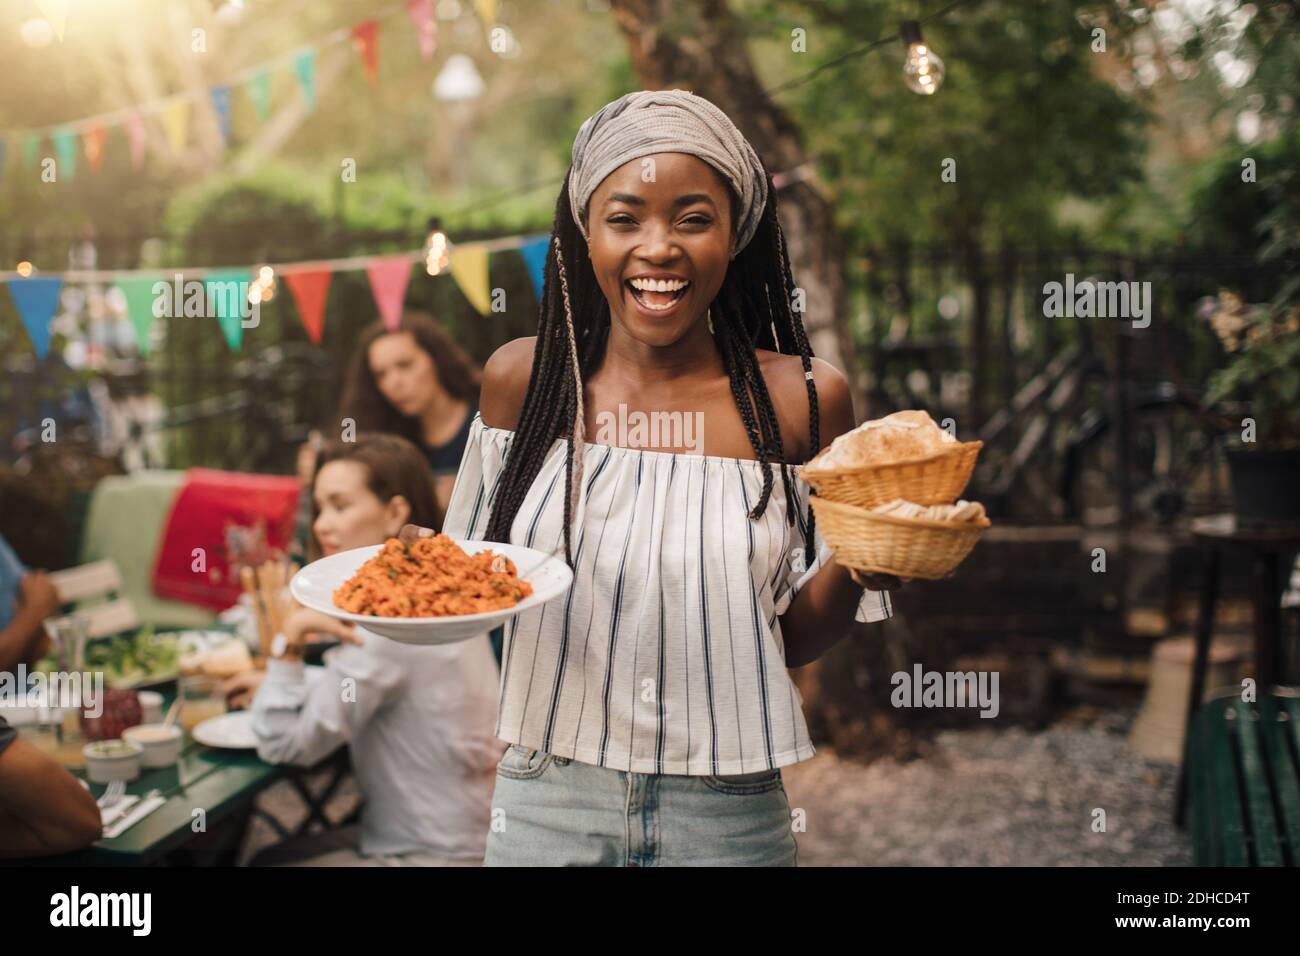 Portrait of smiling young woman carrying food while standing in backyard during garden party Stock Photo